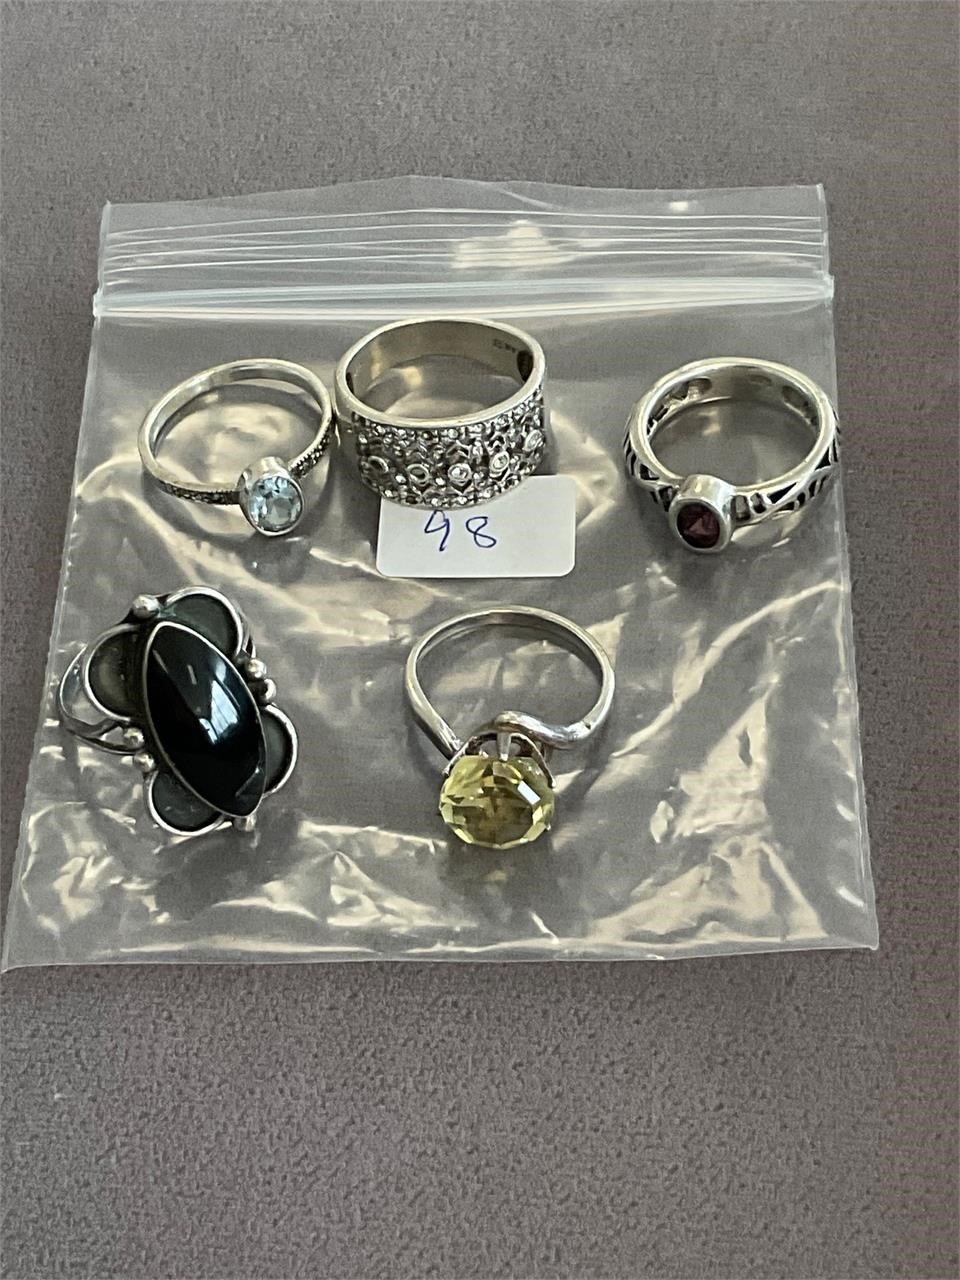 WSUMC Thrift Shop May Jewelry Auction